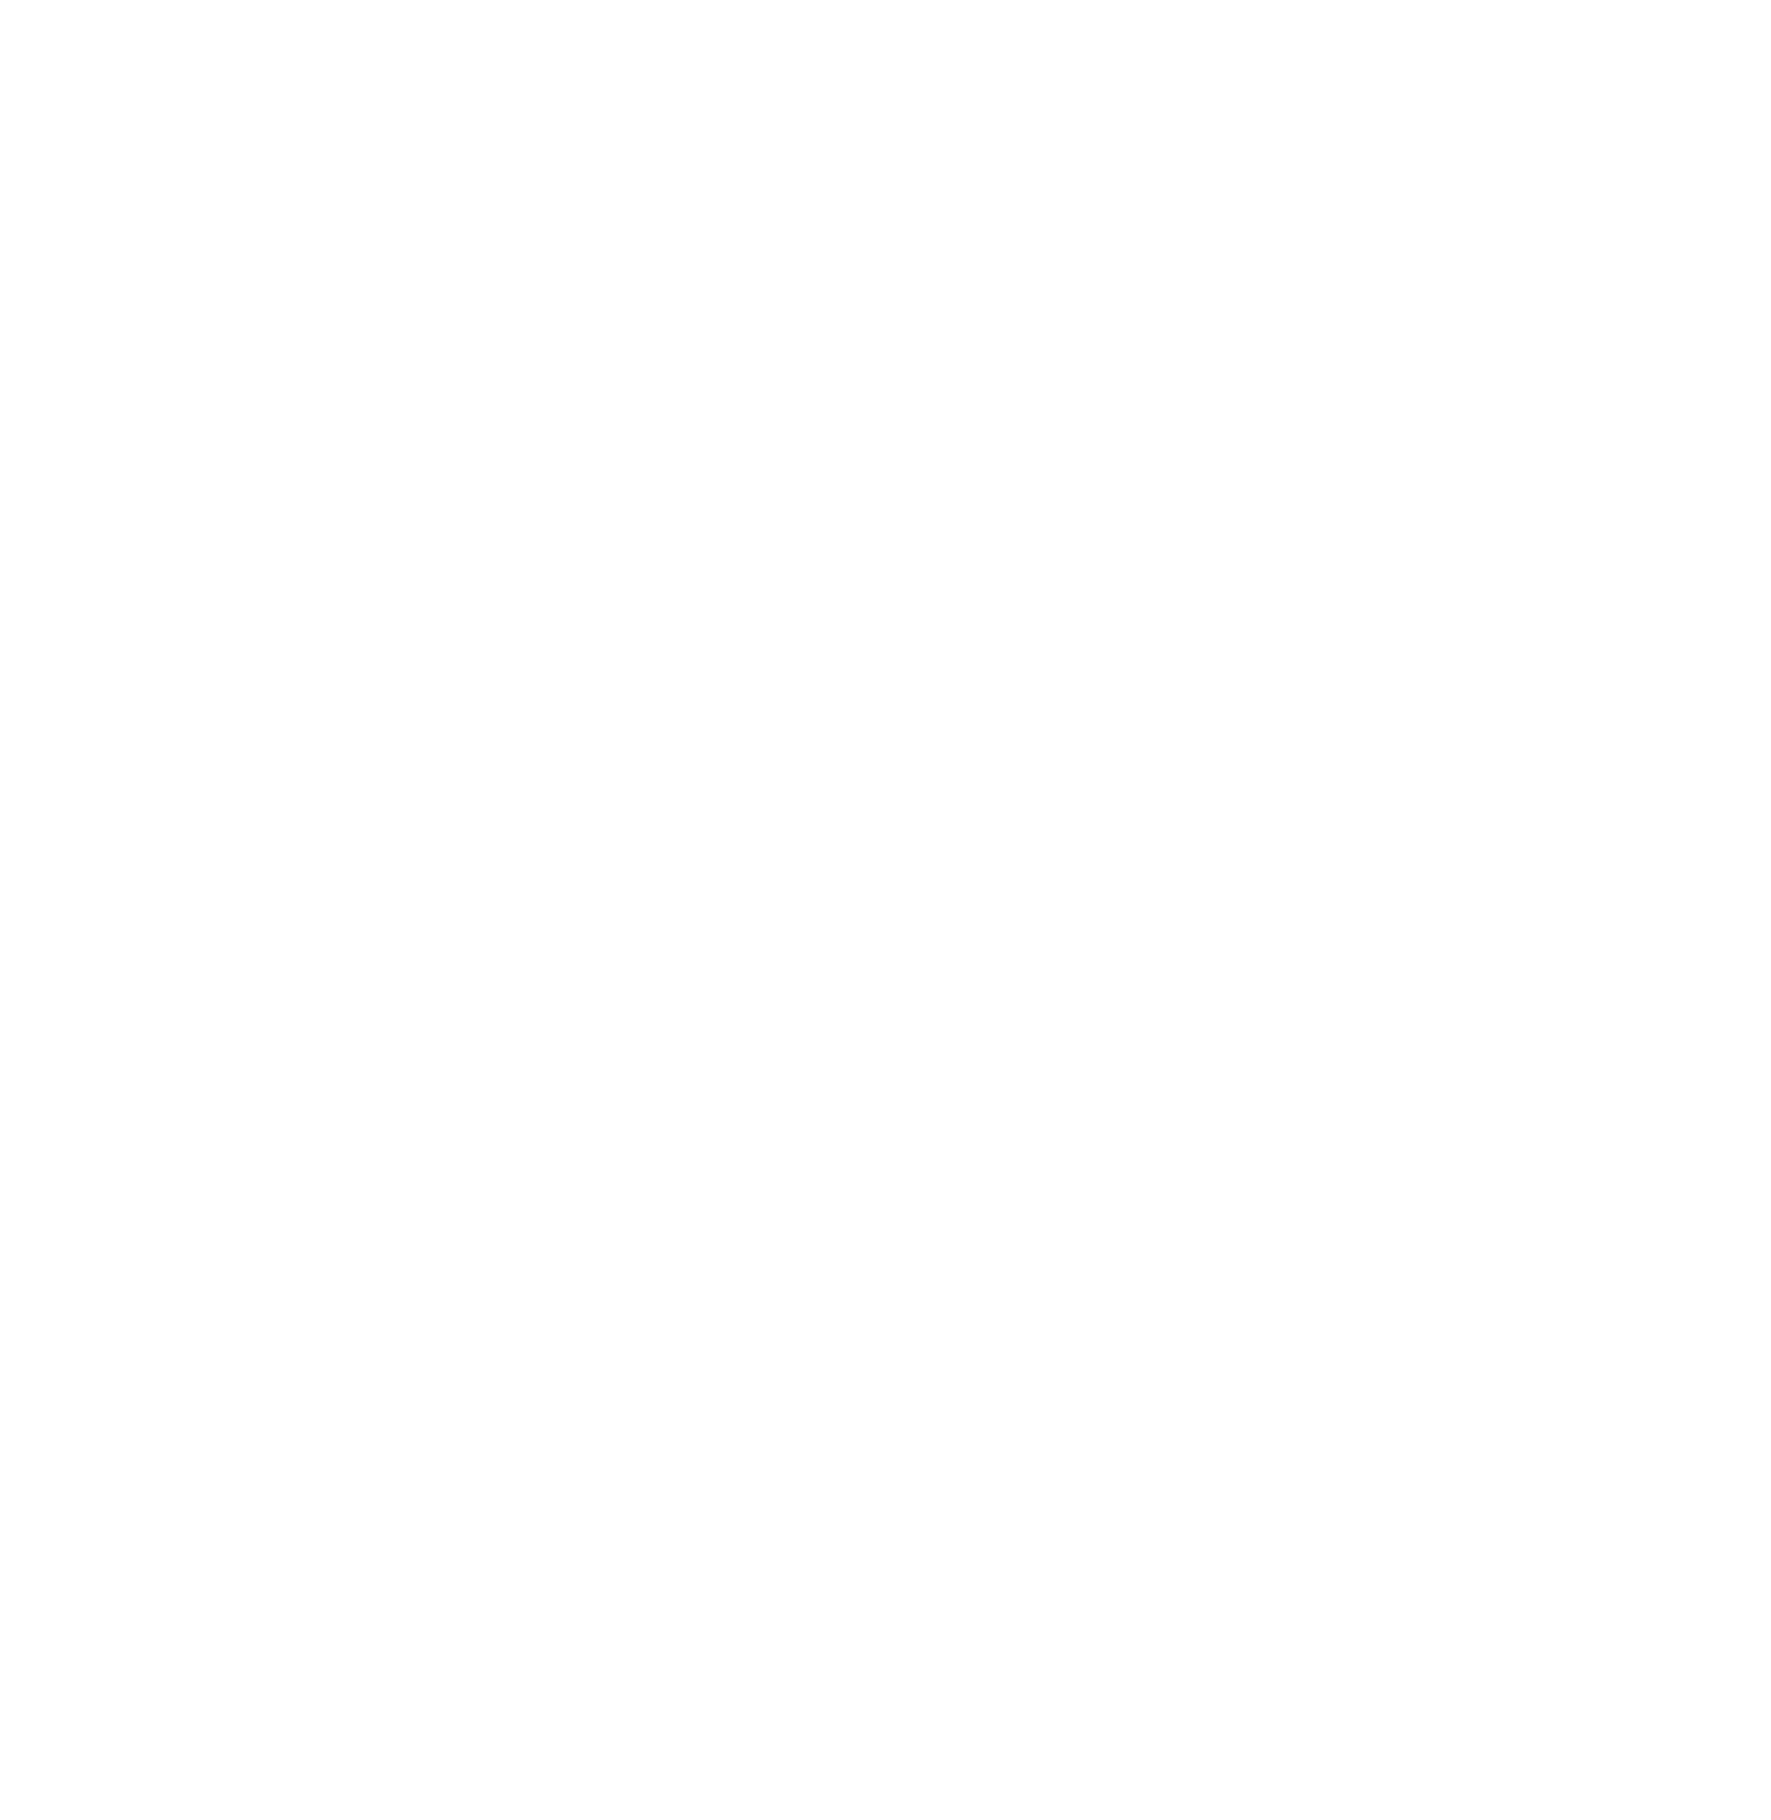 CHOCOLATE BUNNY PRODUCTIONS